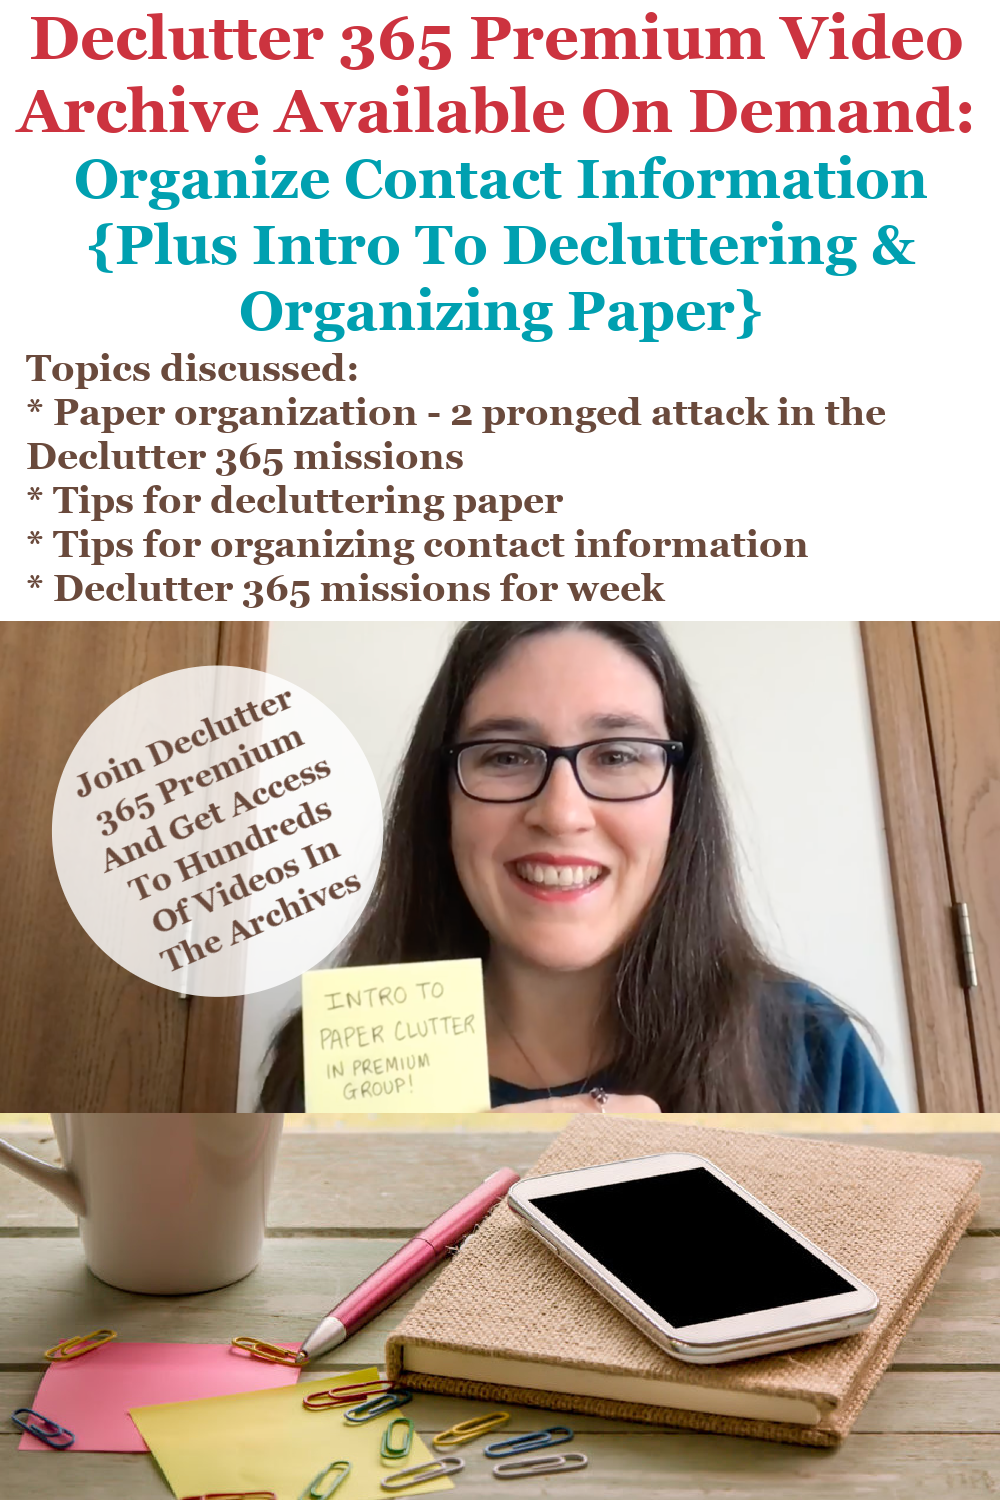 Declutter 365 Premium video archive available on demand all about organizing contact information, plus an introduction to decluttering and organizing paper, on Home Storage Solutions 101